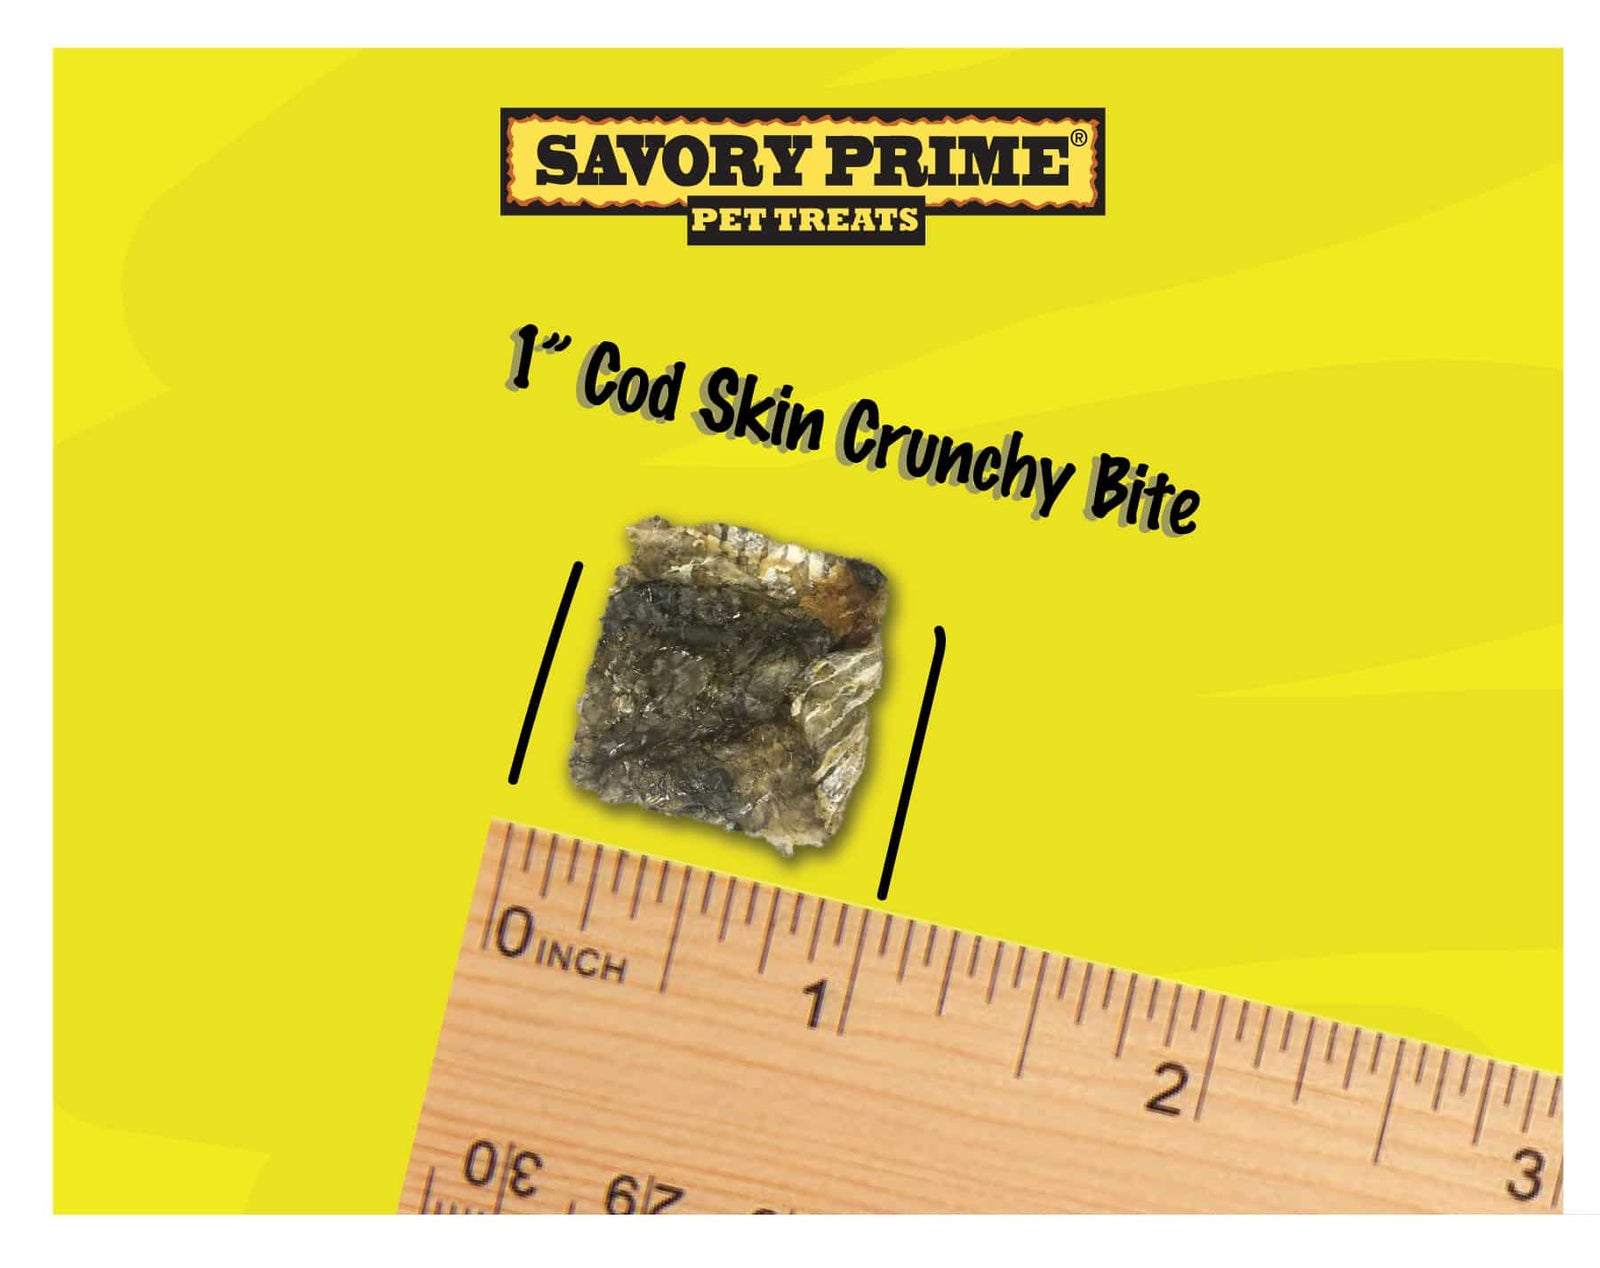 Savory Prime Cod Skin Crunchy Bites Treats for Dogs